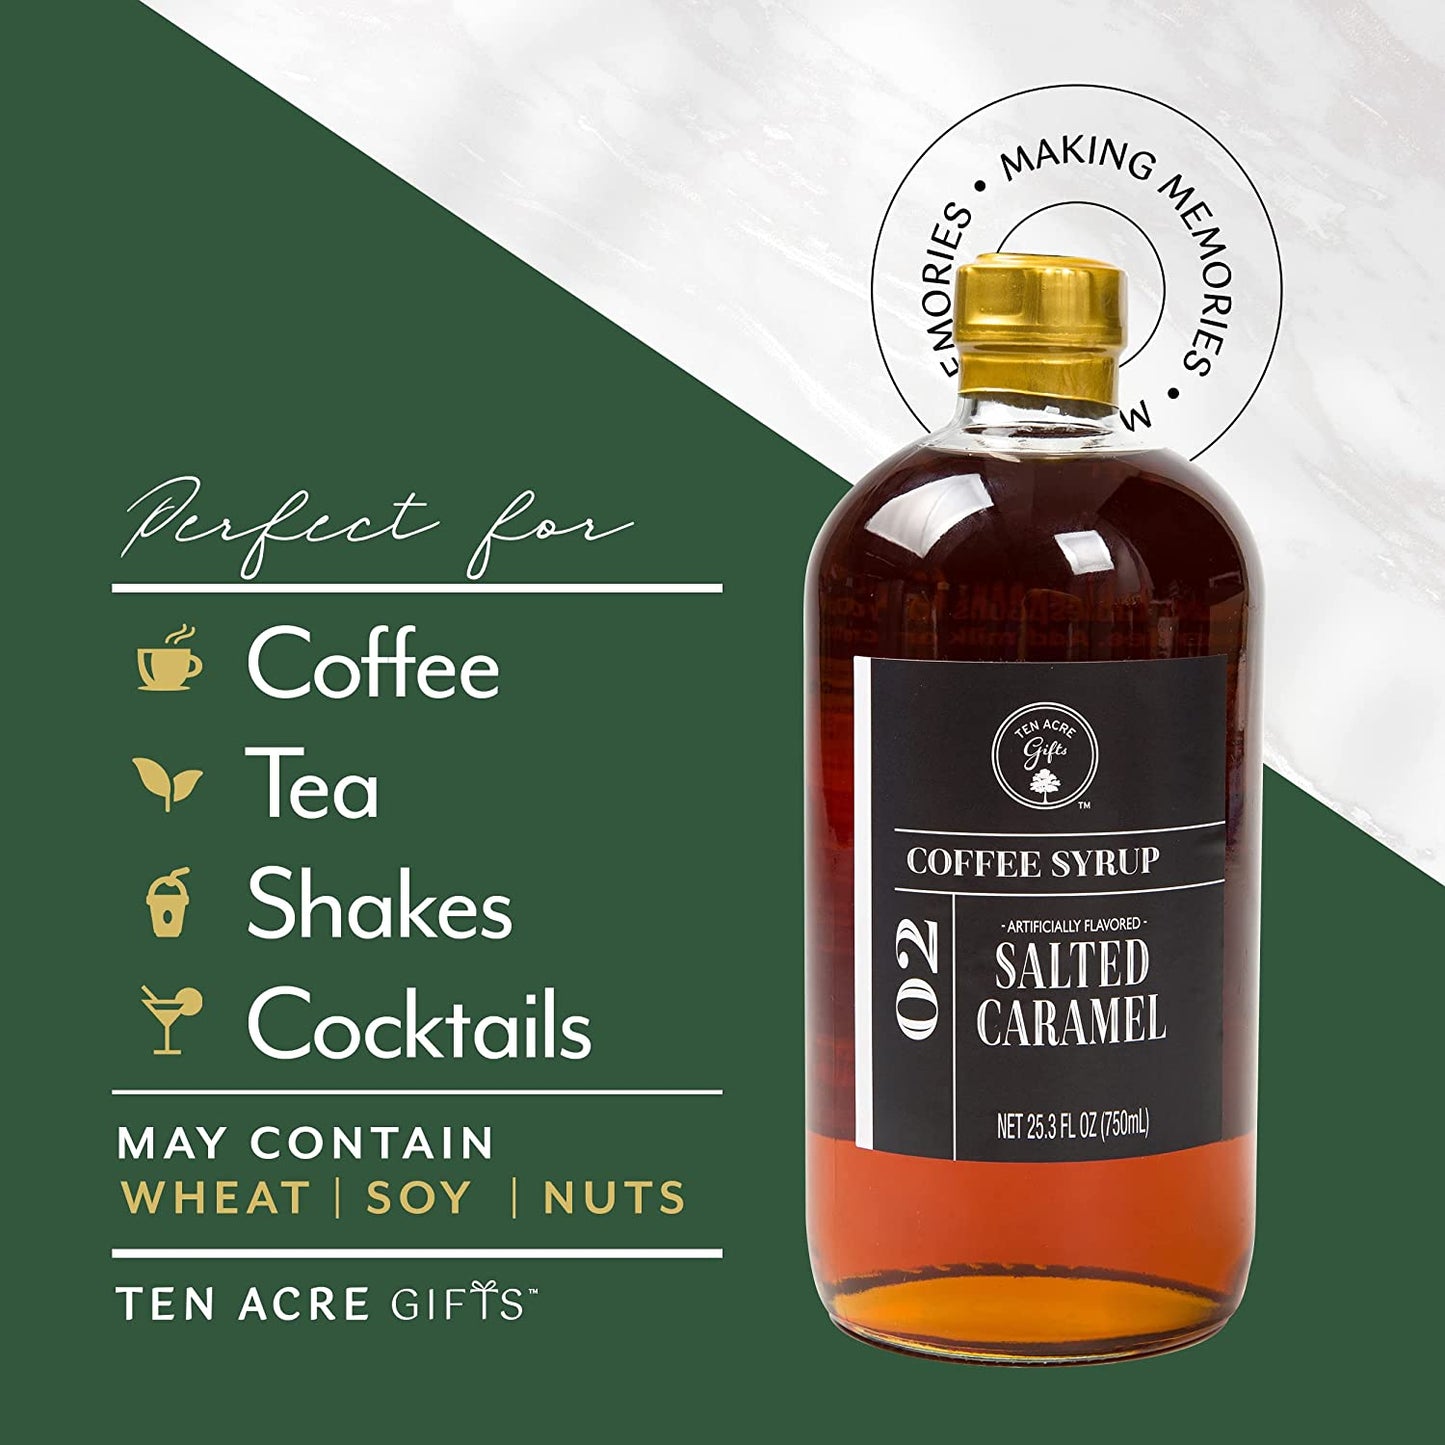 Salted Caramel Coffee Syrup